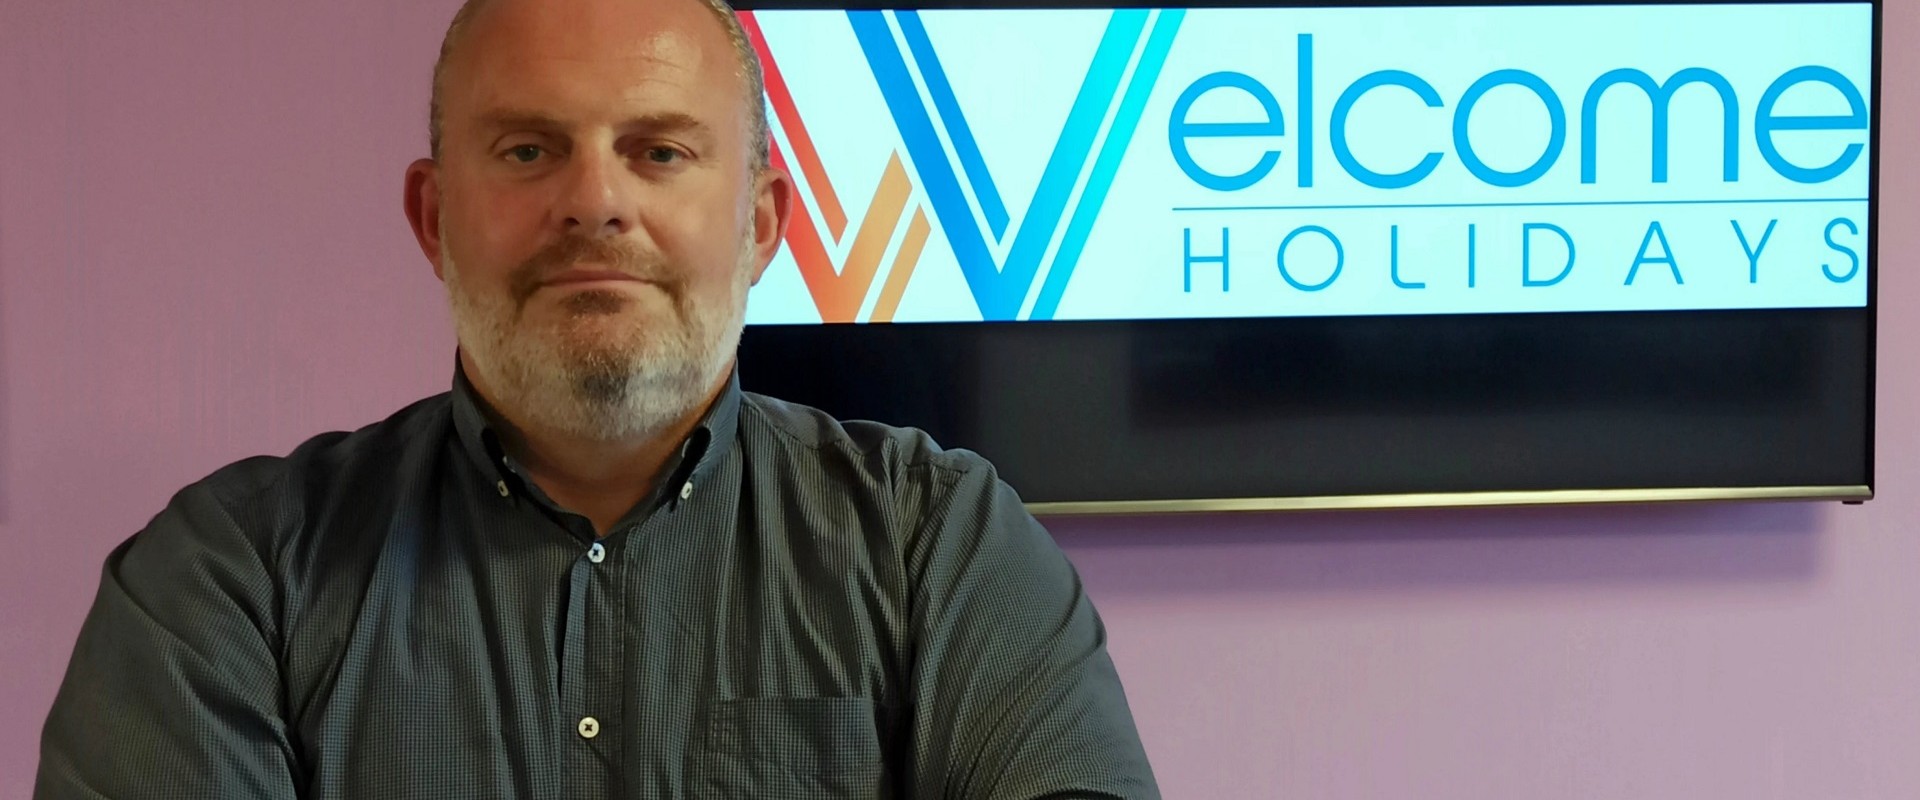 Interview: Georgios Siligardakis, CEO of Welcome Holidays